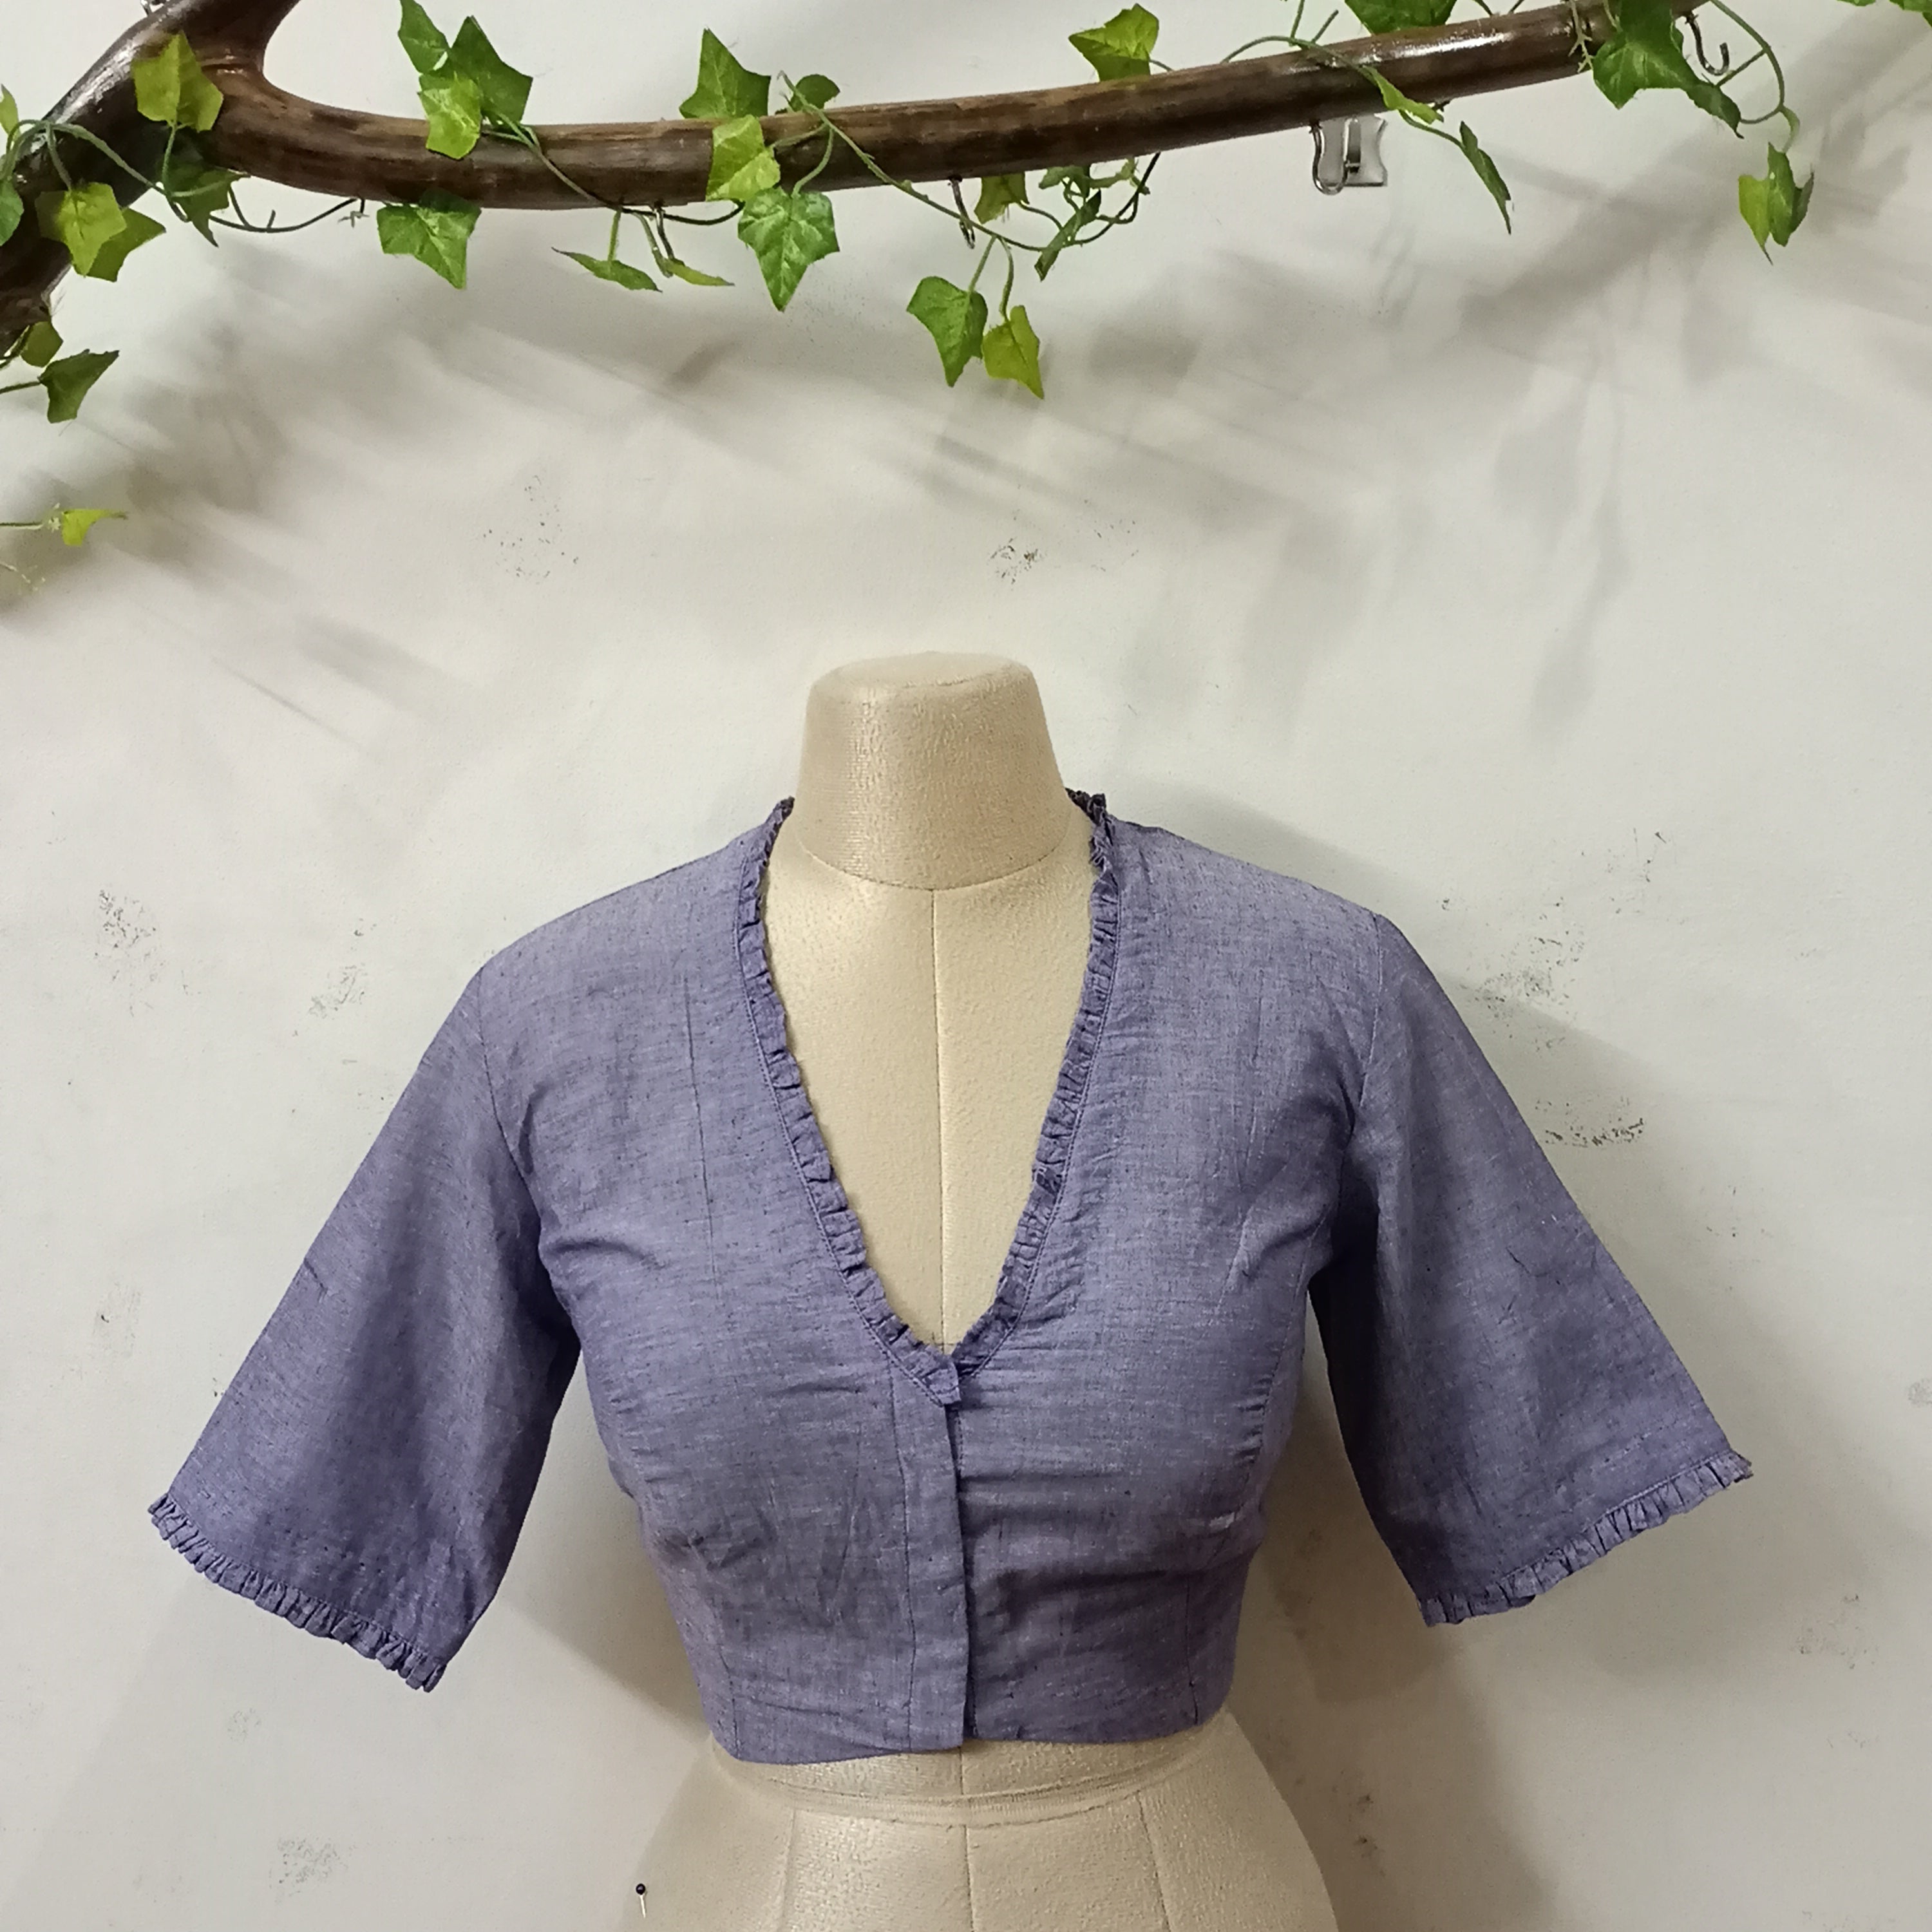 Readymade Tree of Life Frill Blouse- Light Purple periwinkle